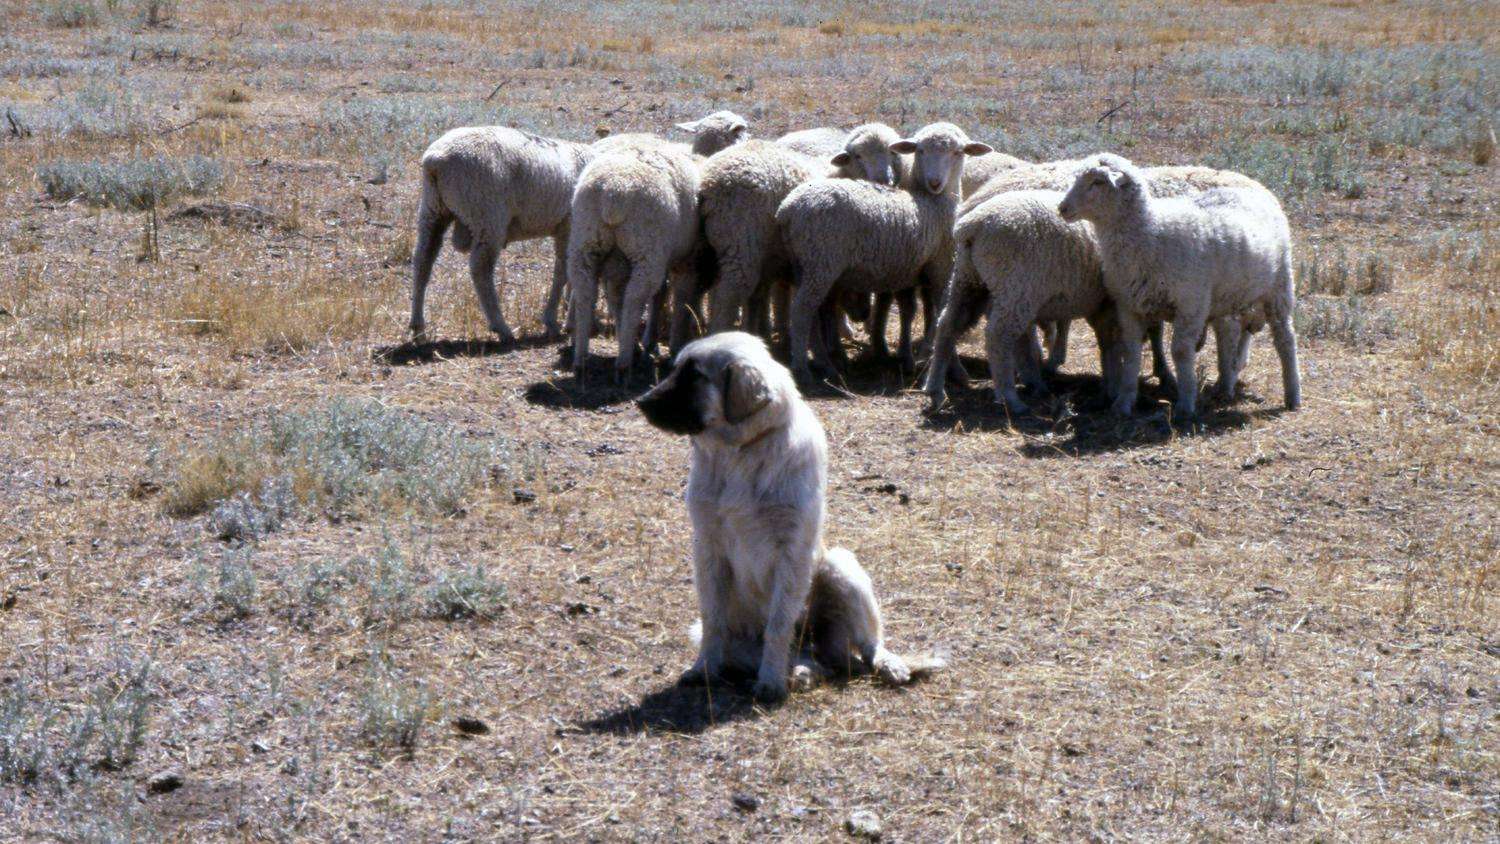 Guard dog watching over a small flock of sheep